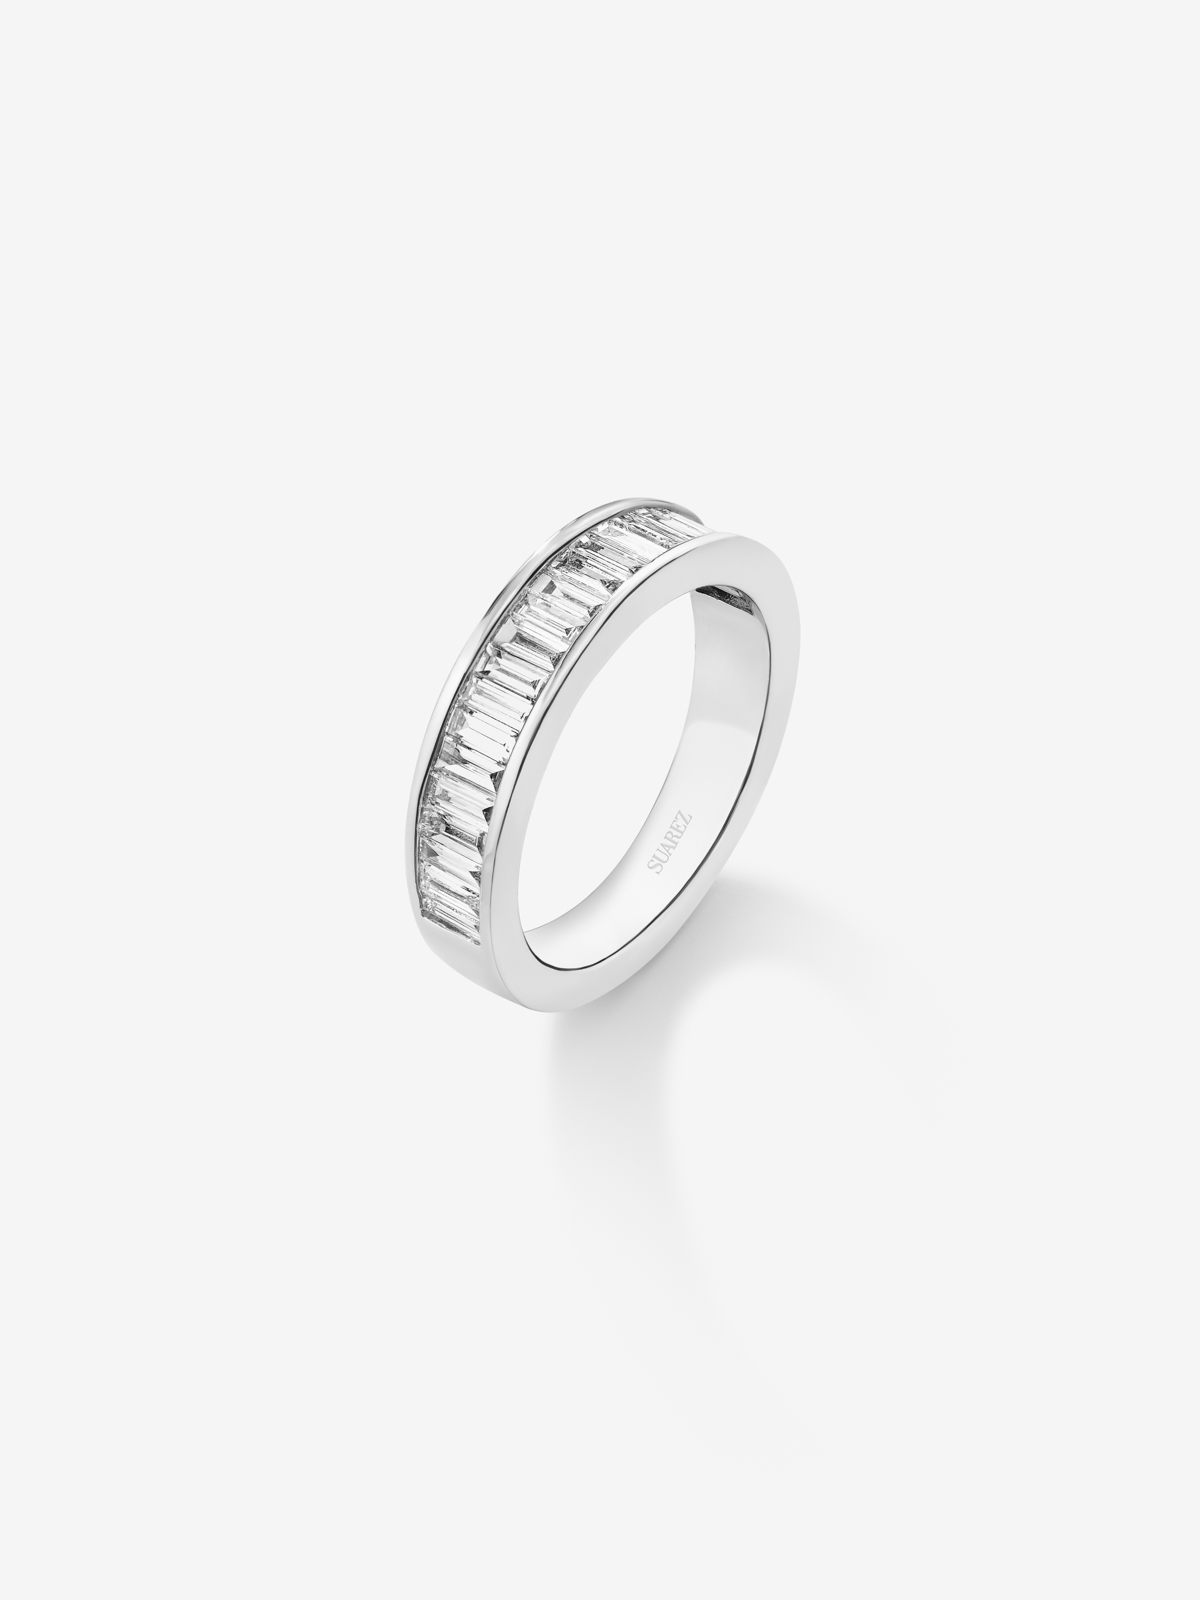 Half-eternity engagement ring in 18K white gold with baguette-cut diamonds on band 1.27ct